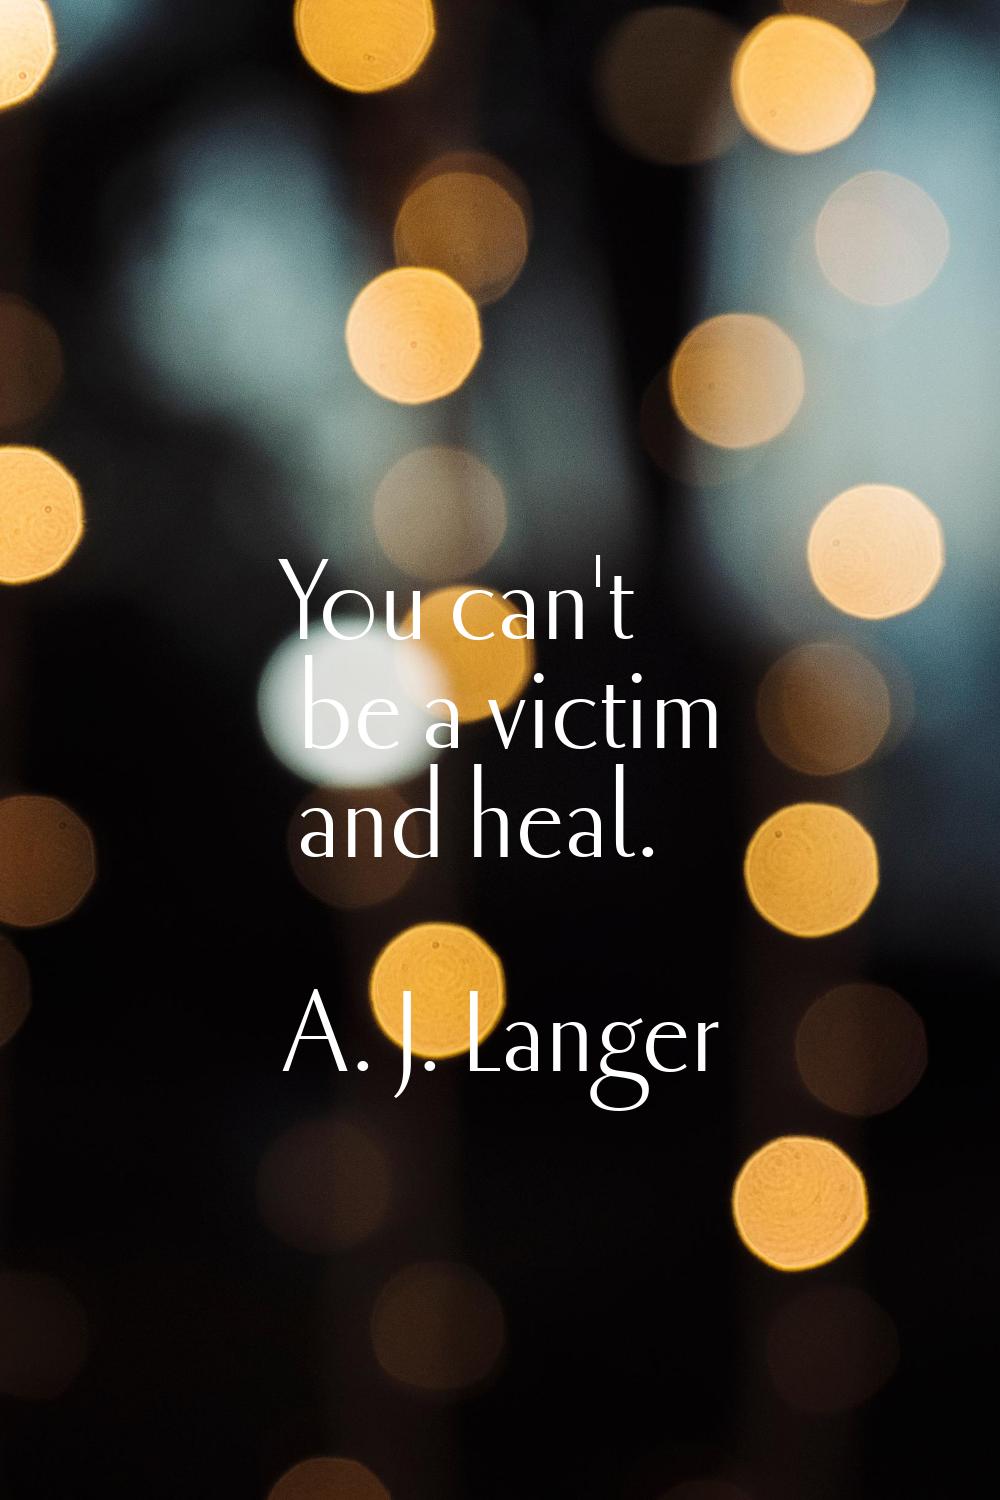 You can't be a victim and heal.